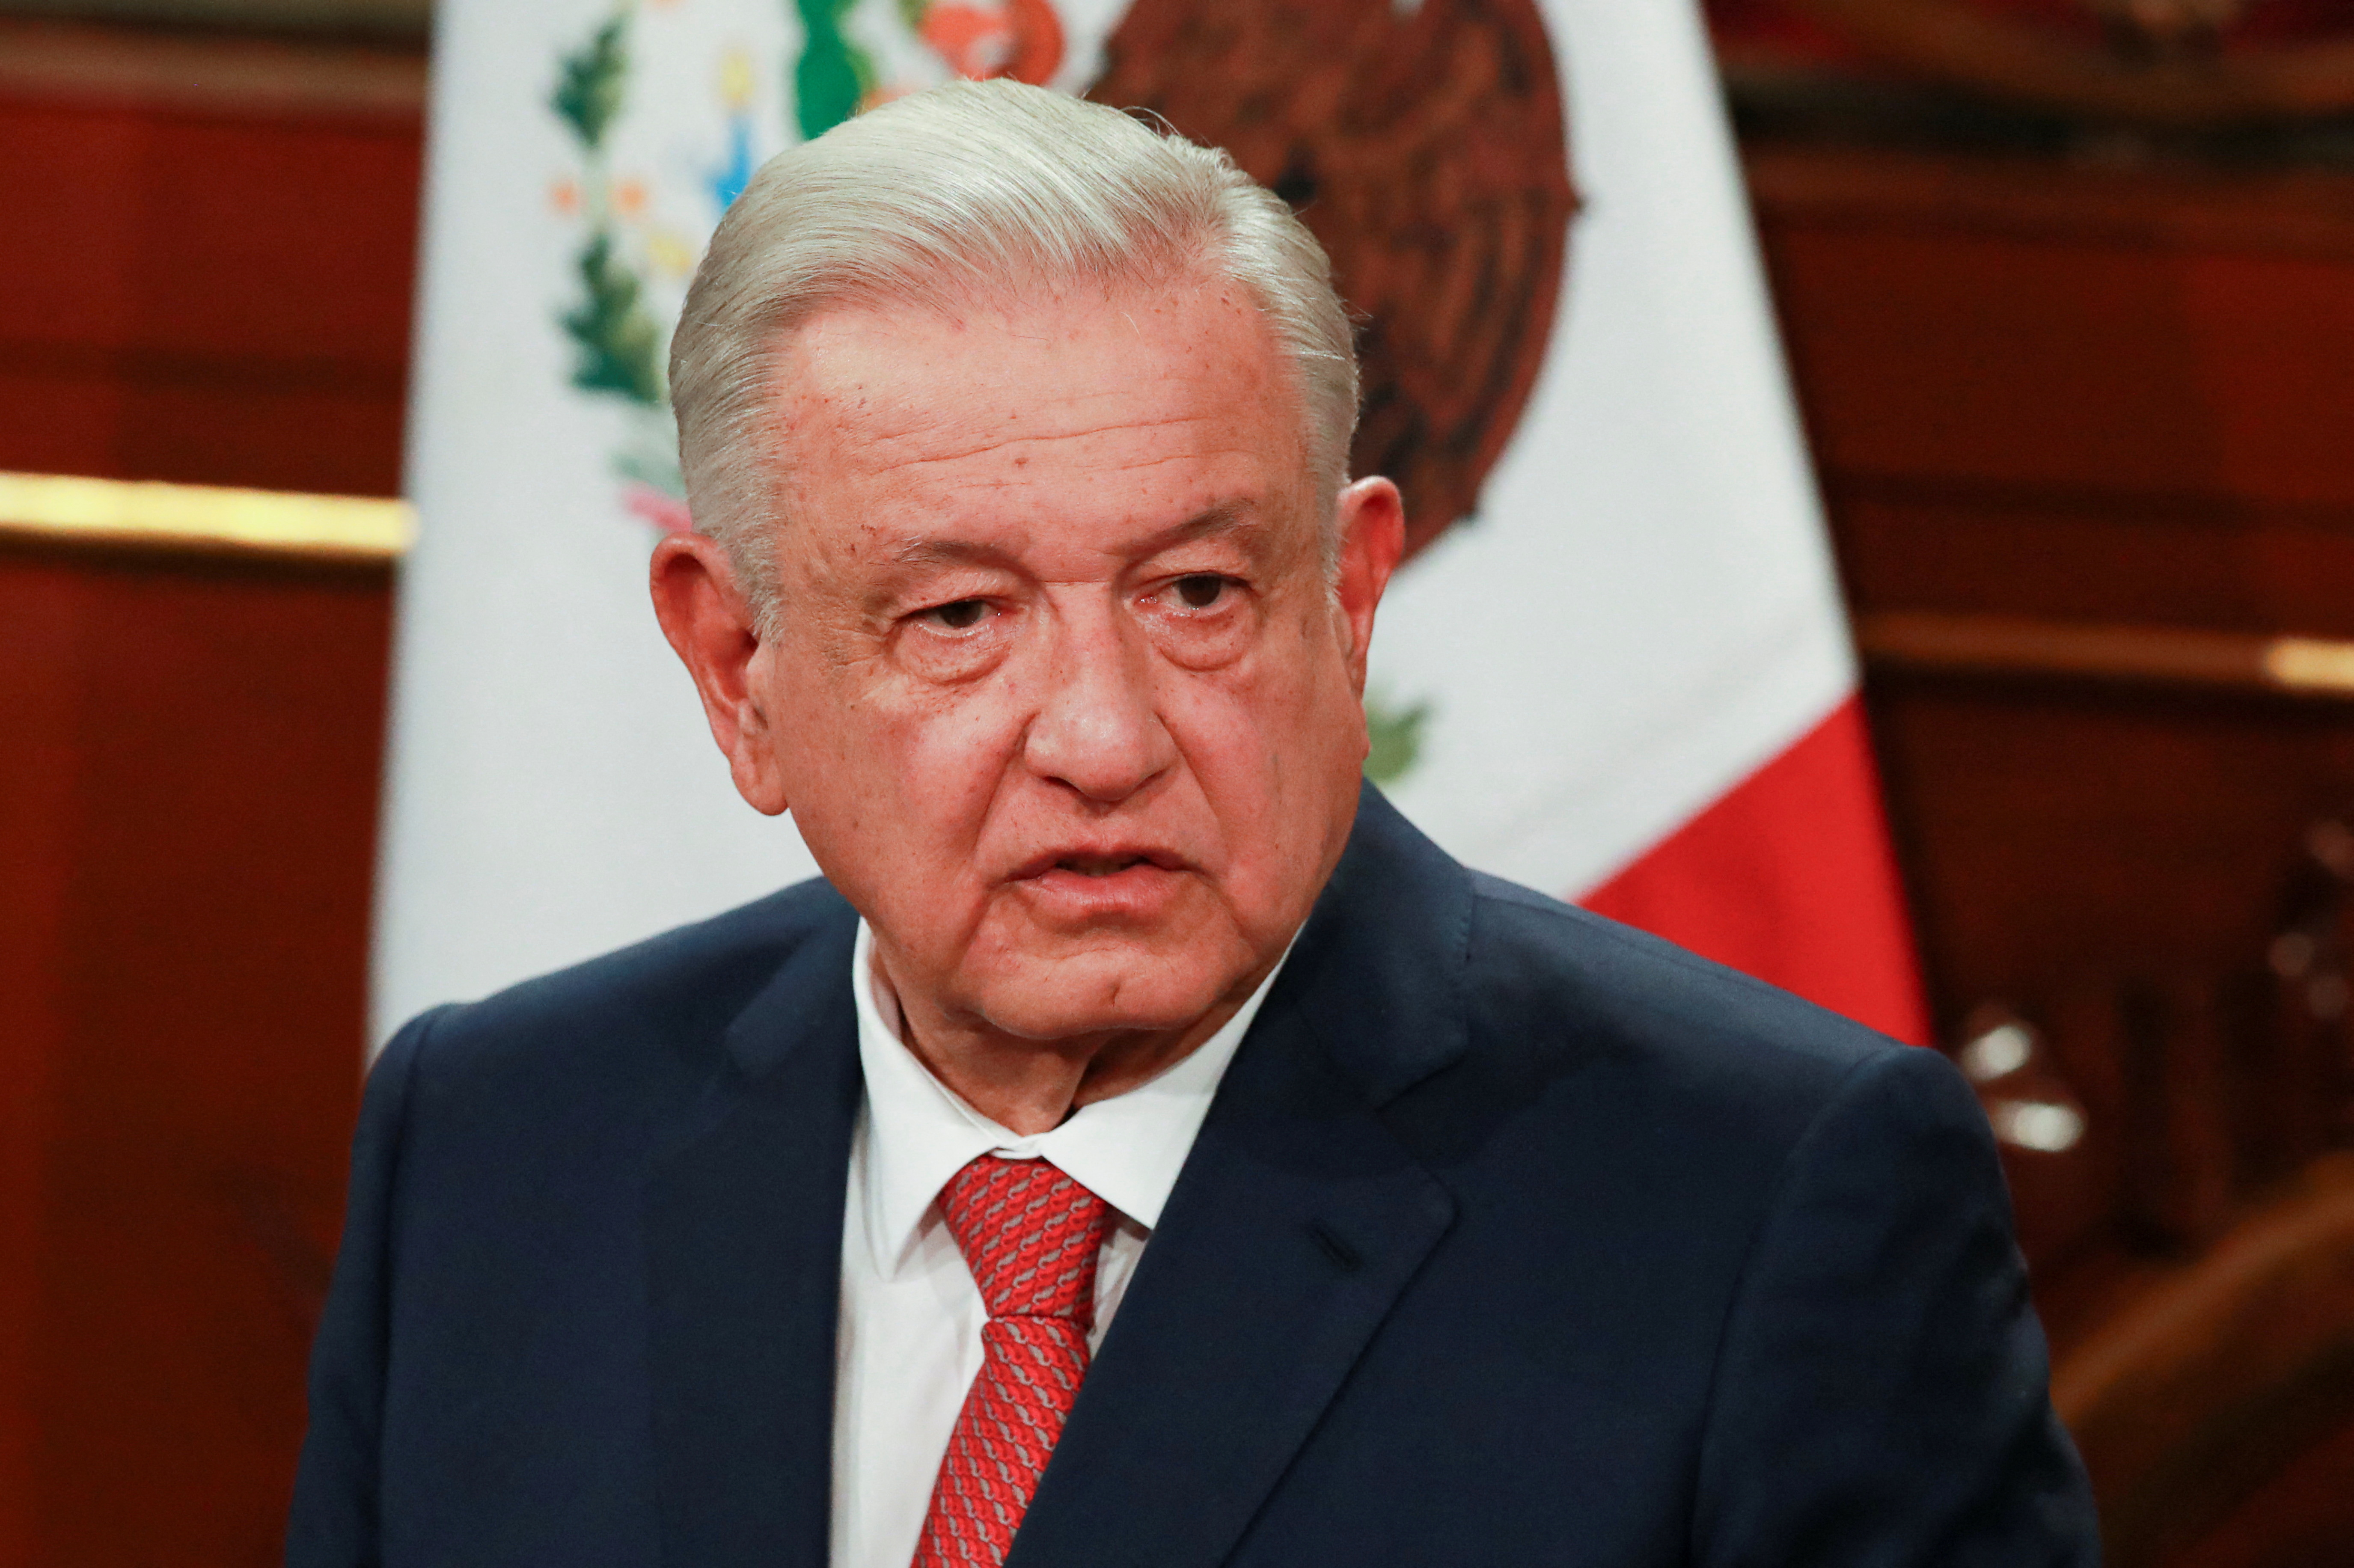 Mexico's President Andres Manuel Lopez Obrador presents constitutional reforms, in Mexico City